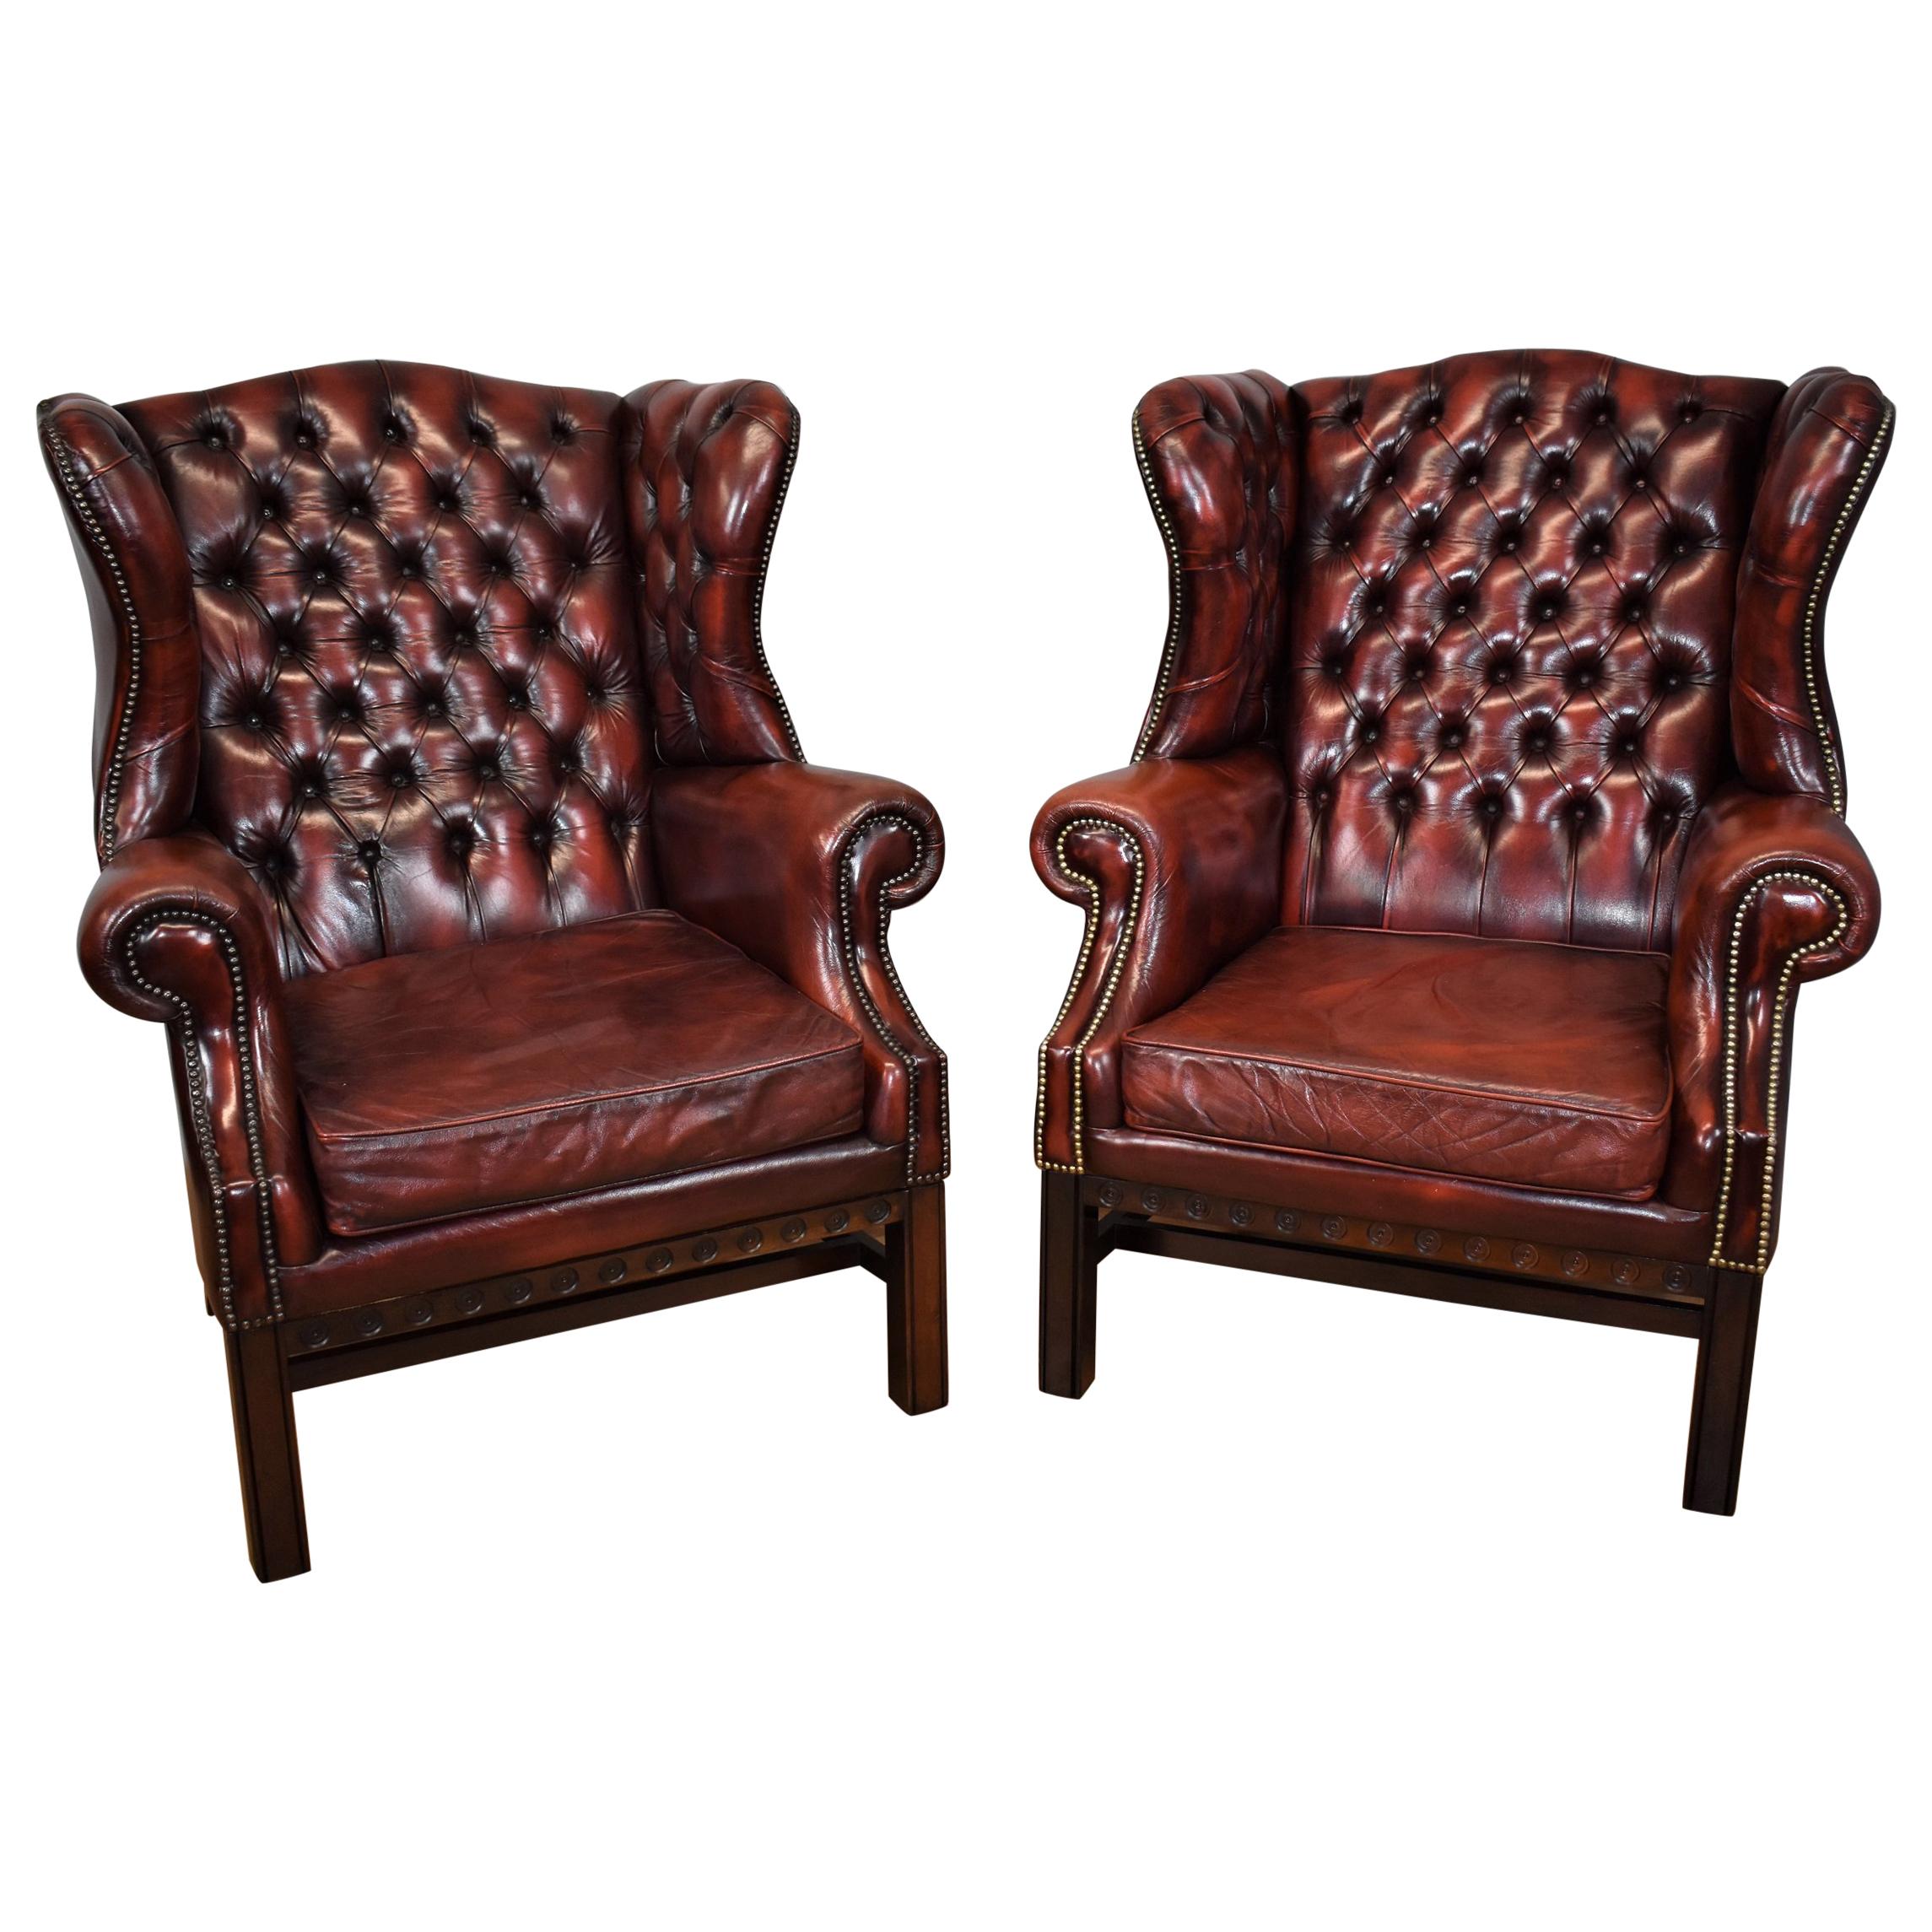 20th Century Pair of Large English Red Leather Wingback Armchairs